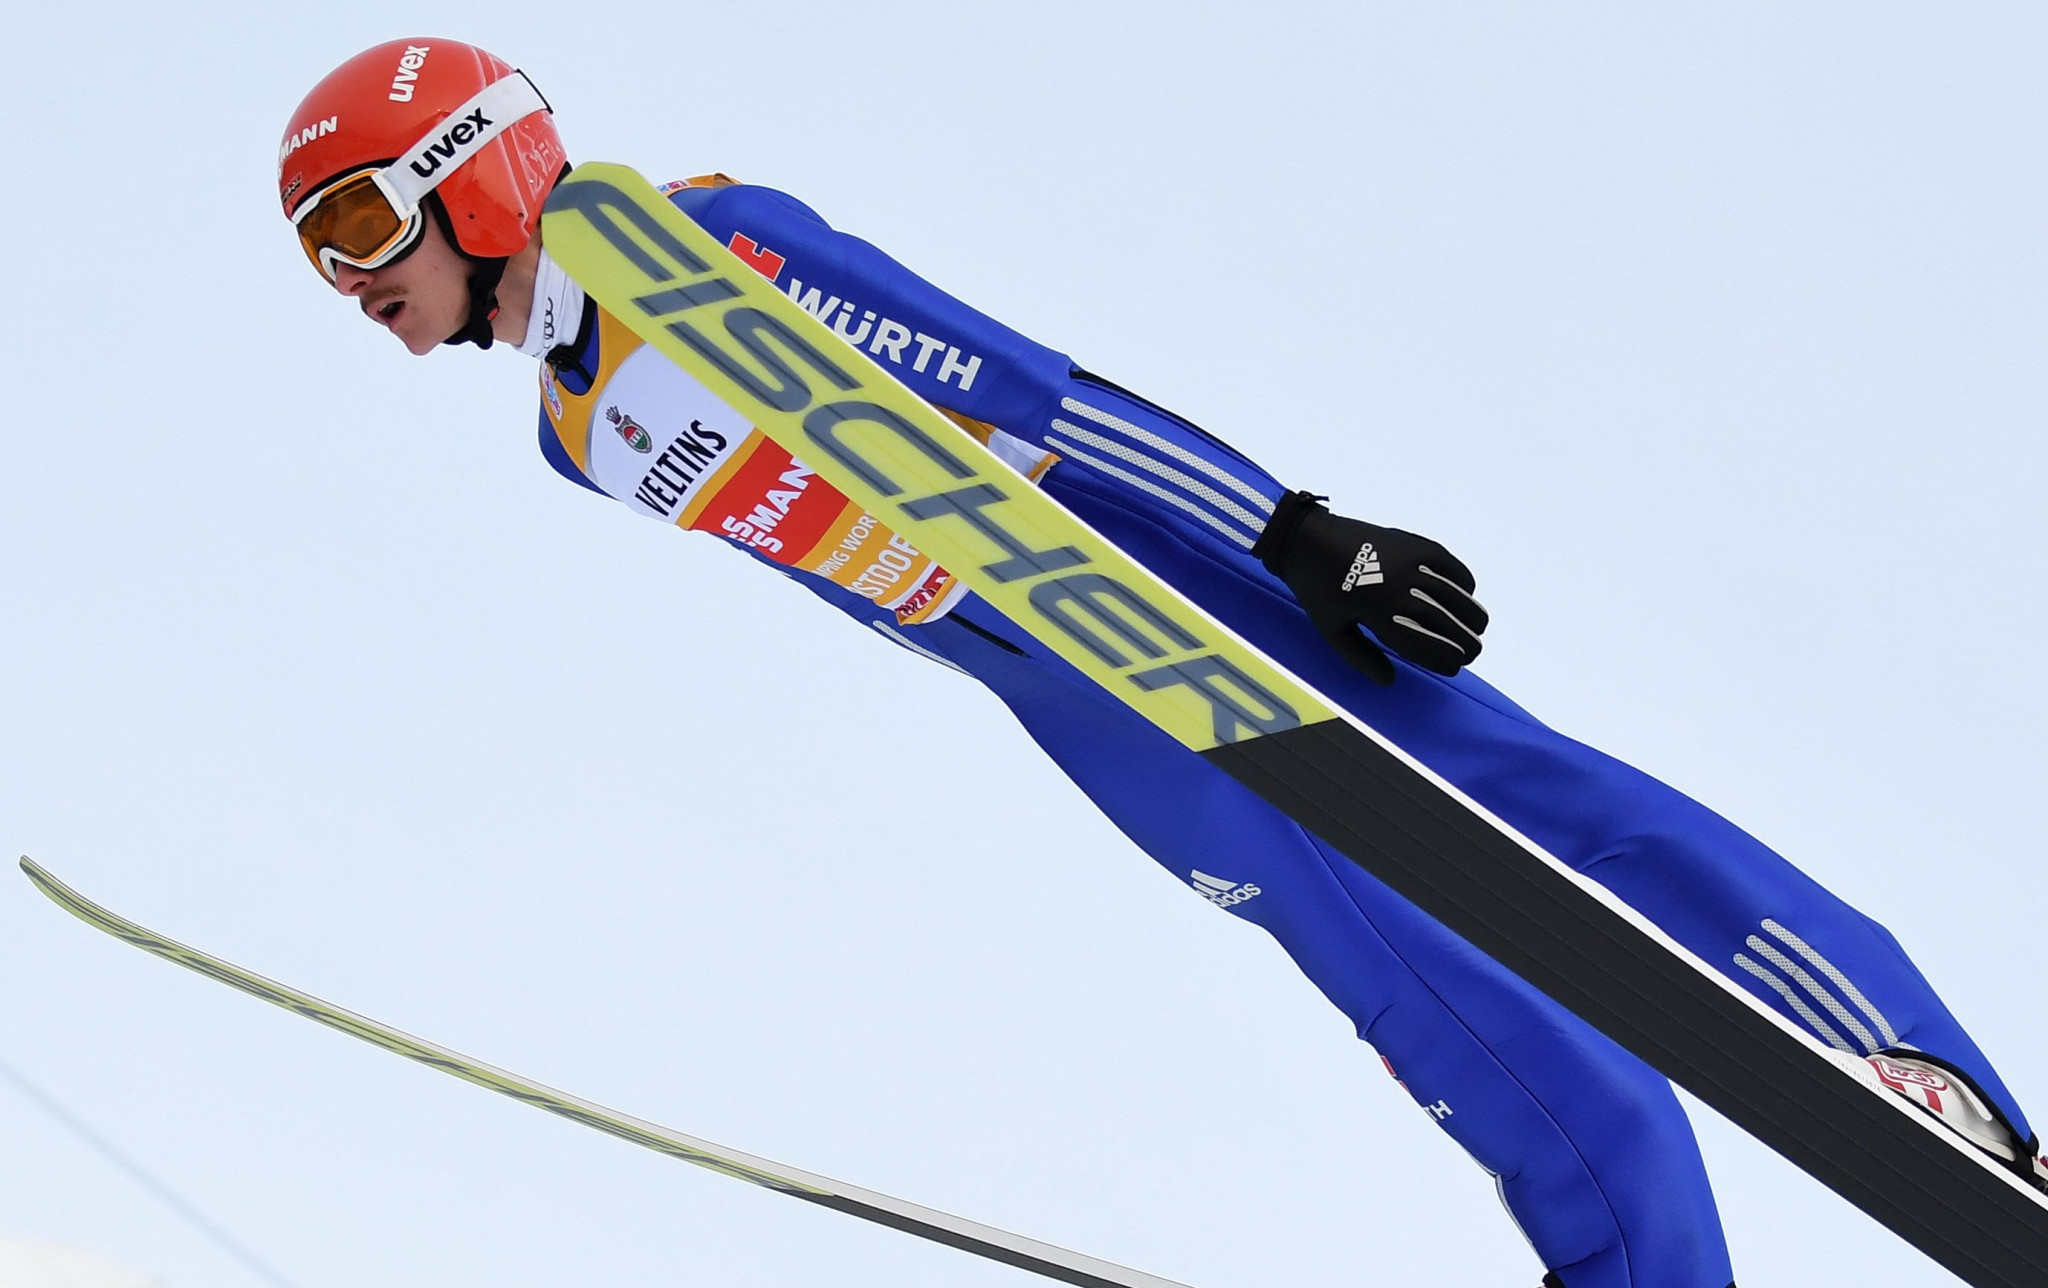 Freitag out on top once again during qualification for ski jump Four Hills event in Oberstdorf